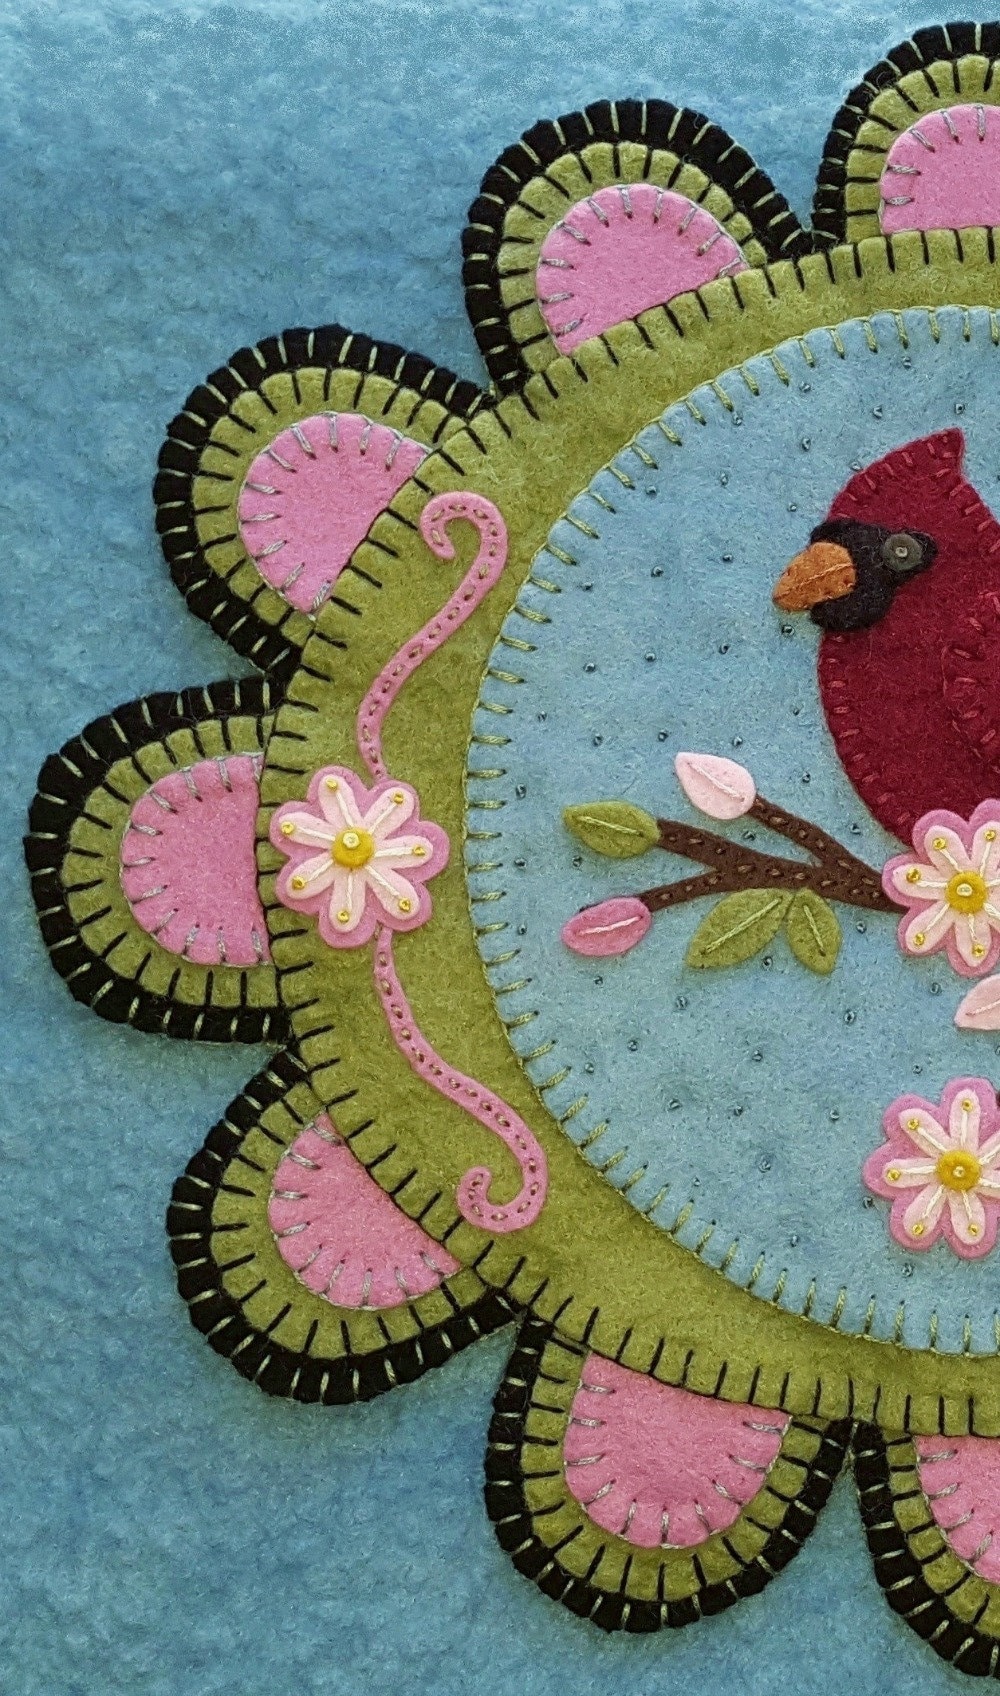 REDFEATHERED FRIEND Wool Applique Kit Wool Applique Penny 